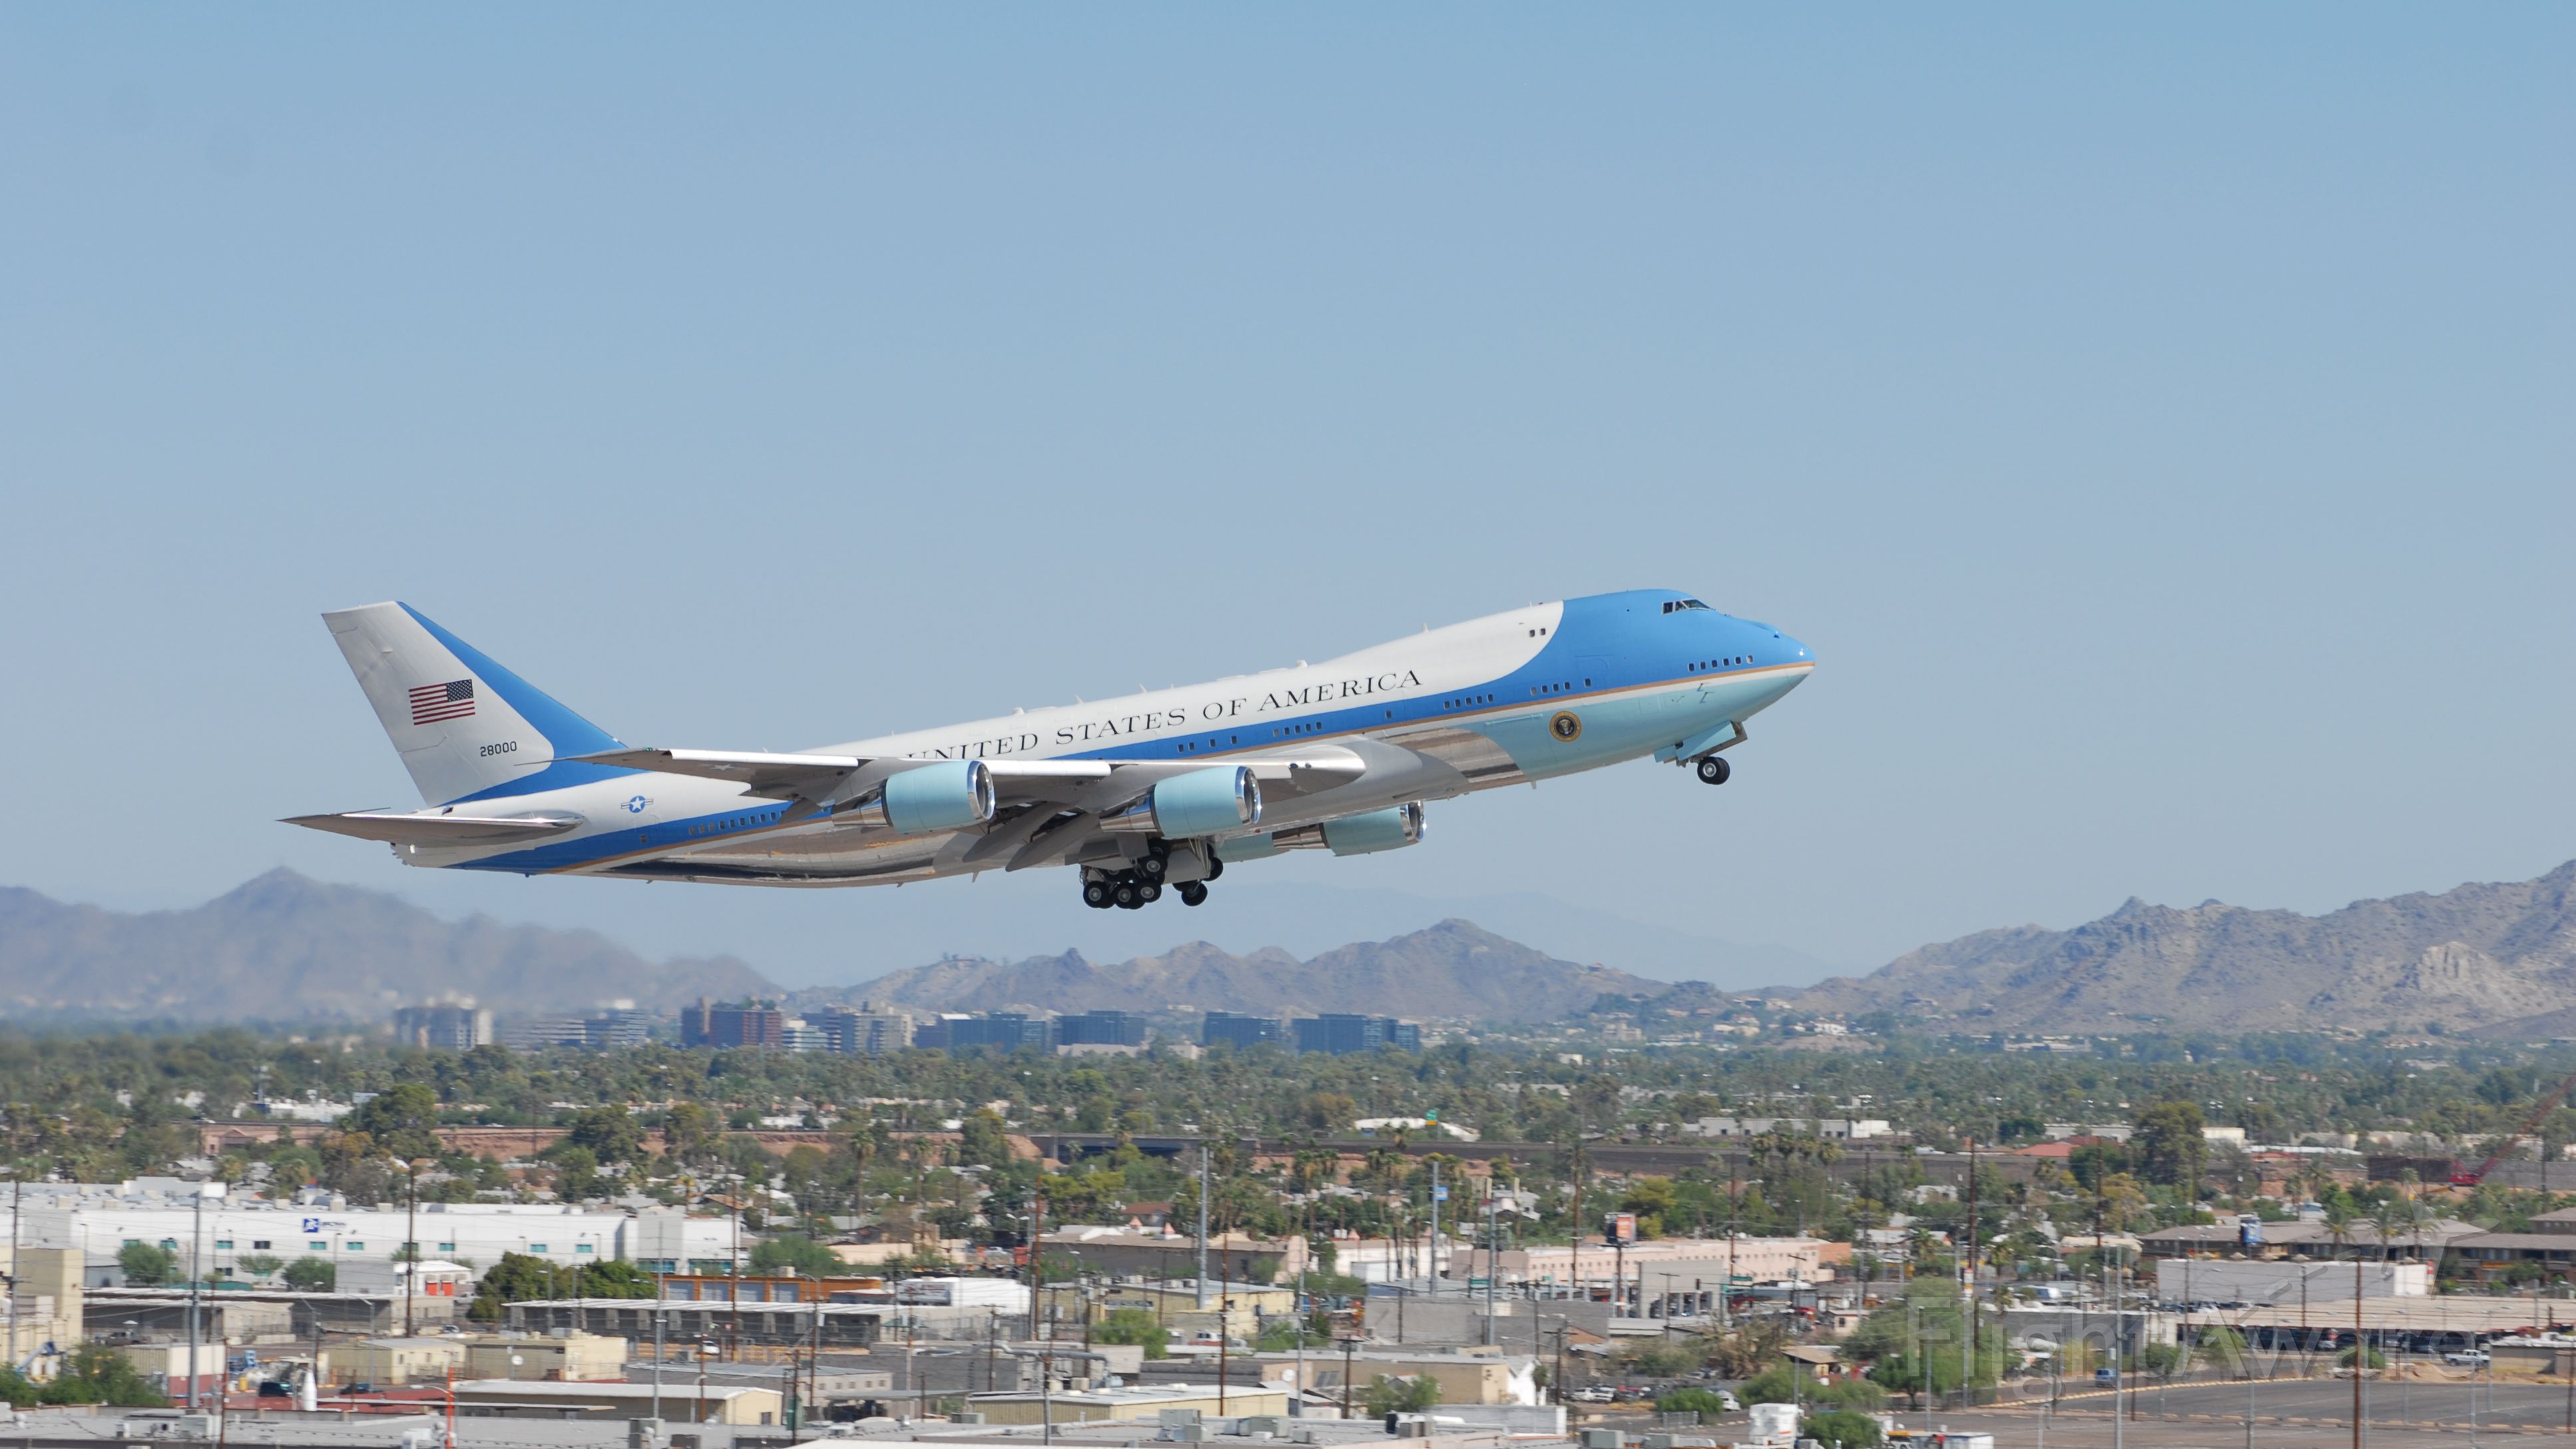 N28000 — - Boeing 747-200 / VC-25A "Air Force One" departing Phoenix Sky Harbor Airport (KPHX), en route to the Grand Canyon.